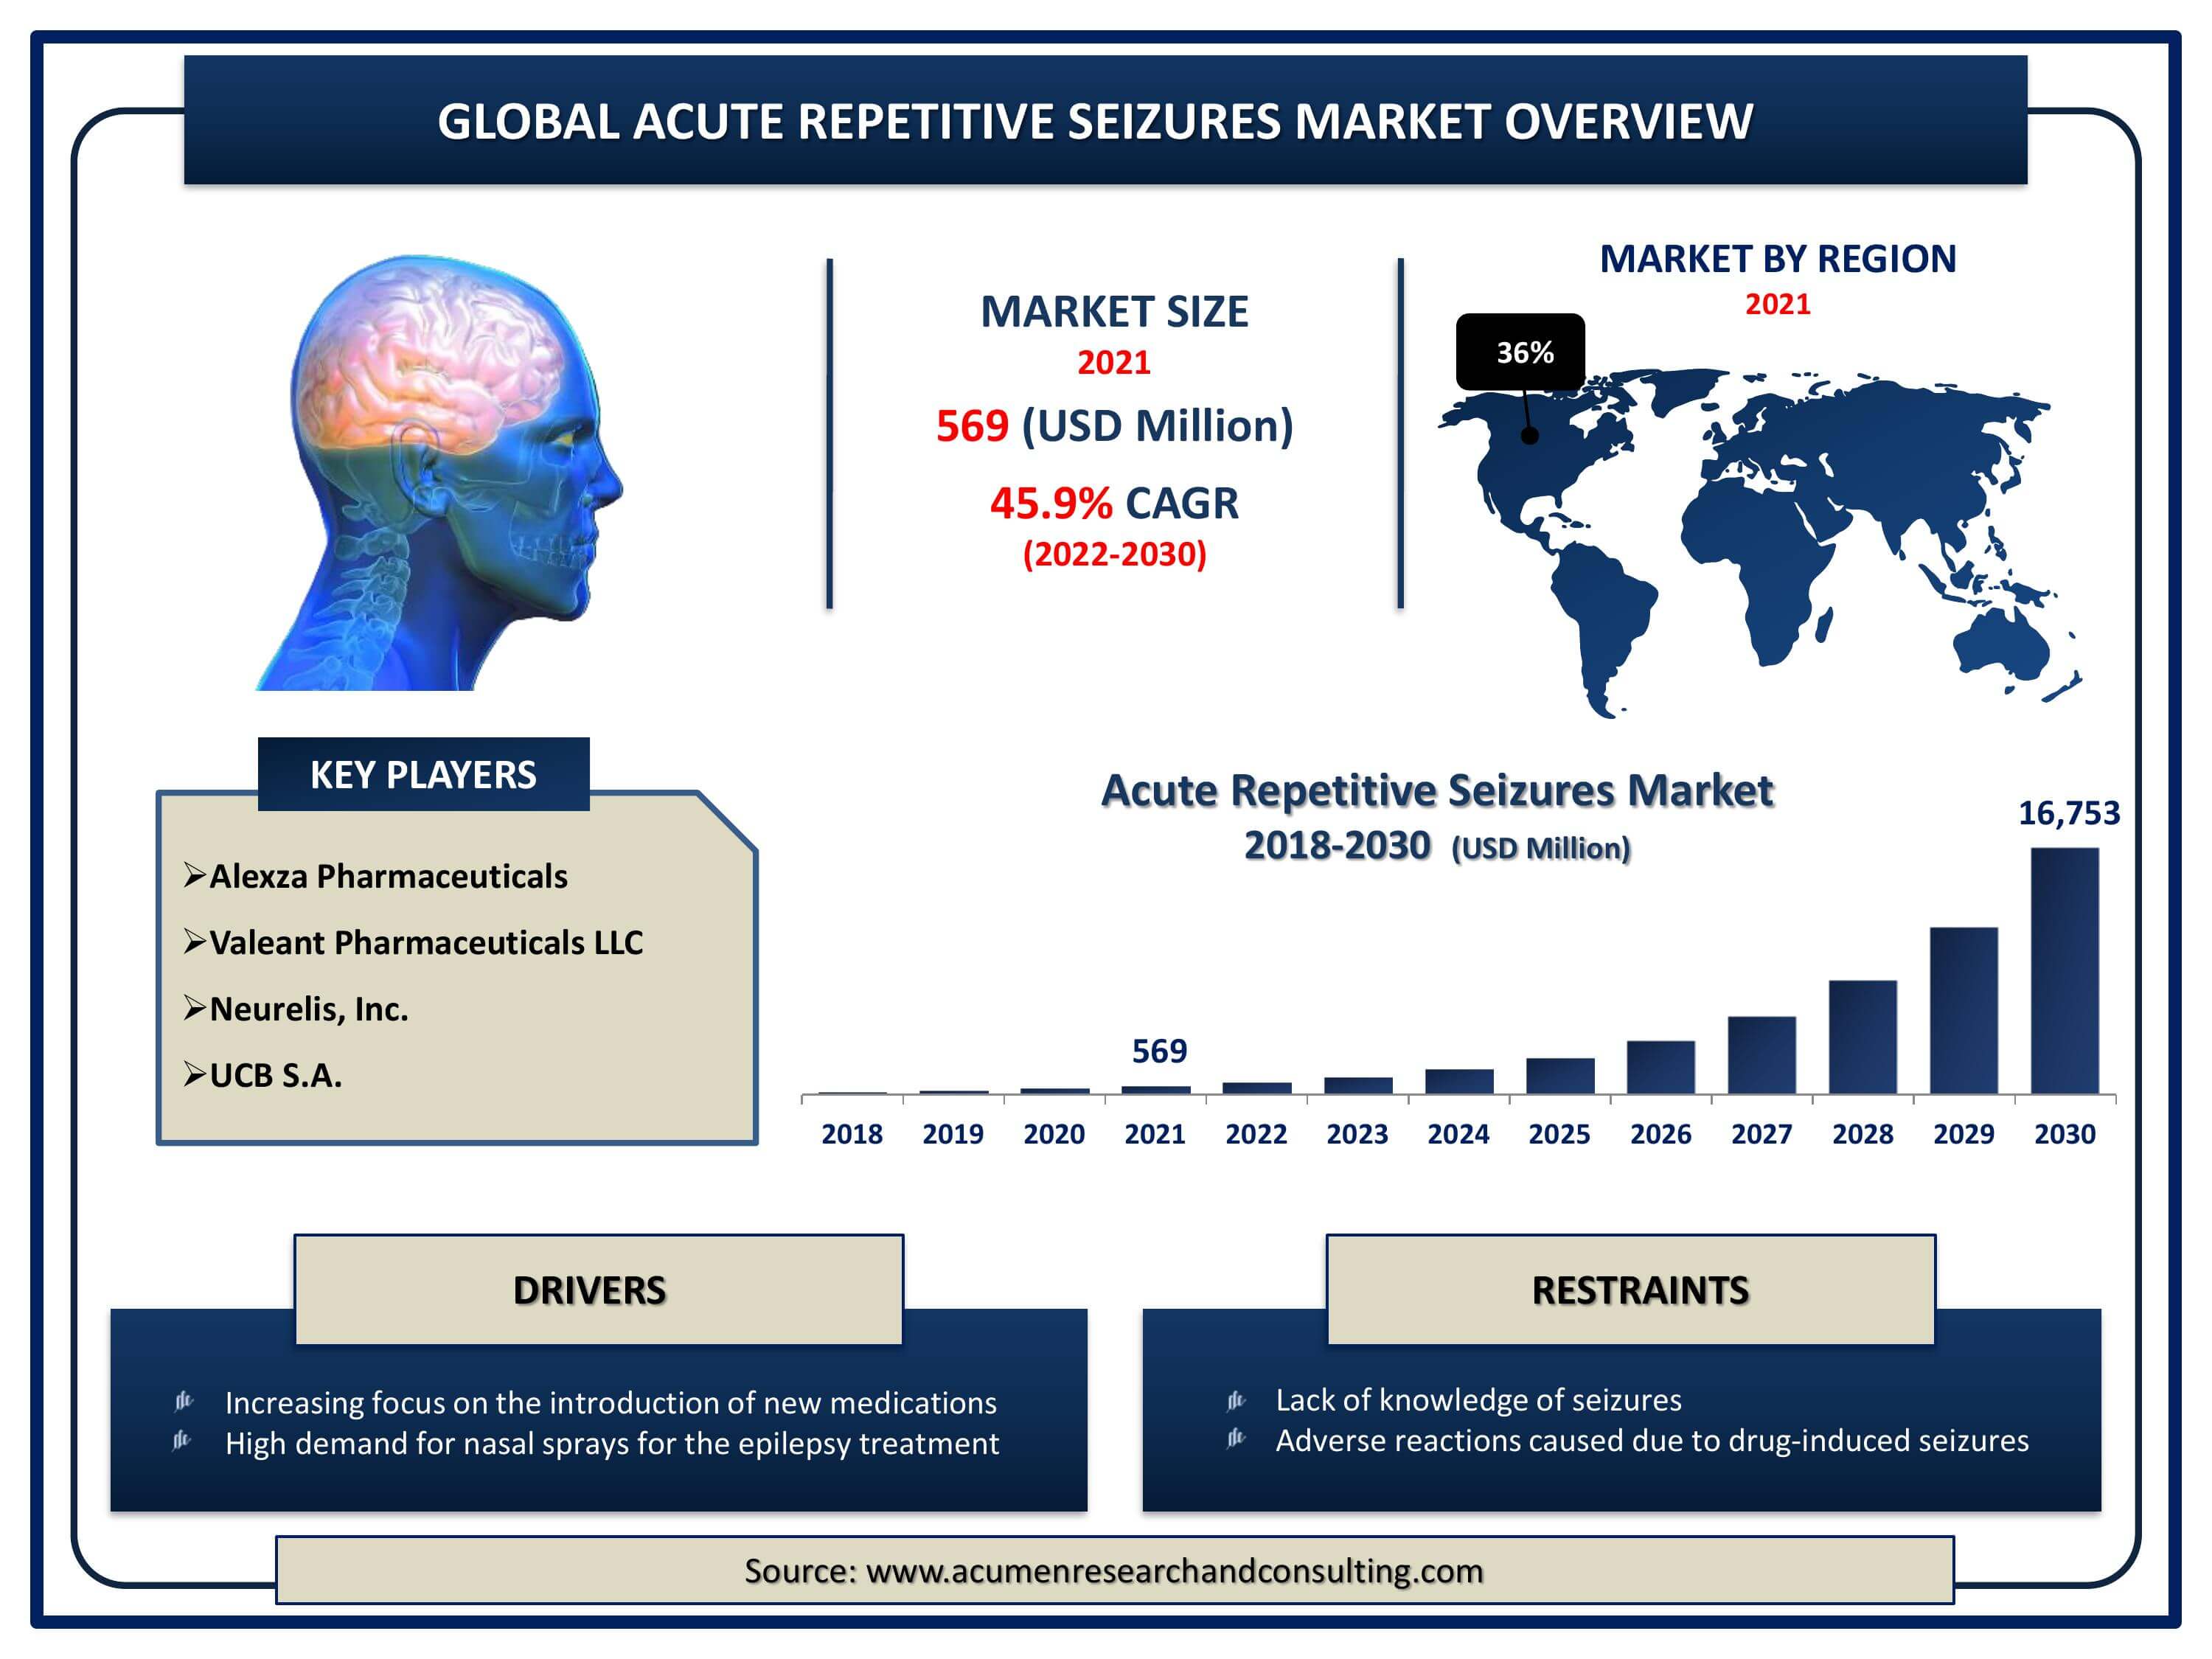 Global acute repetitive seizures market revenue is estimated to expand by USD 16,753 Million by 2030, with a 45.9% CAGR from 2022 to 2030.